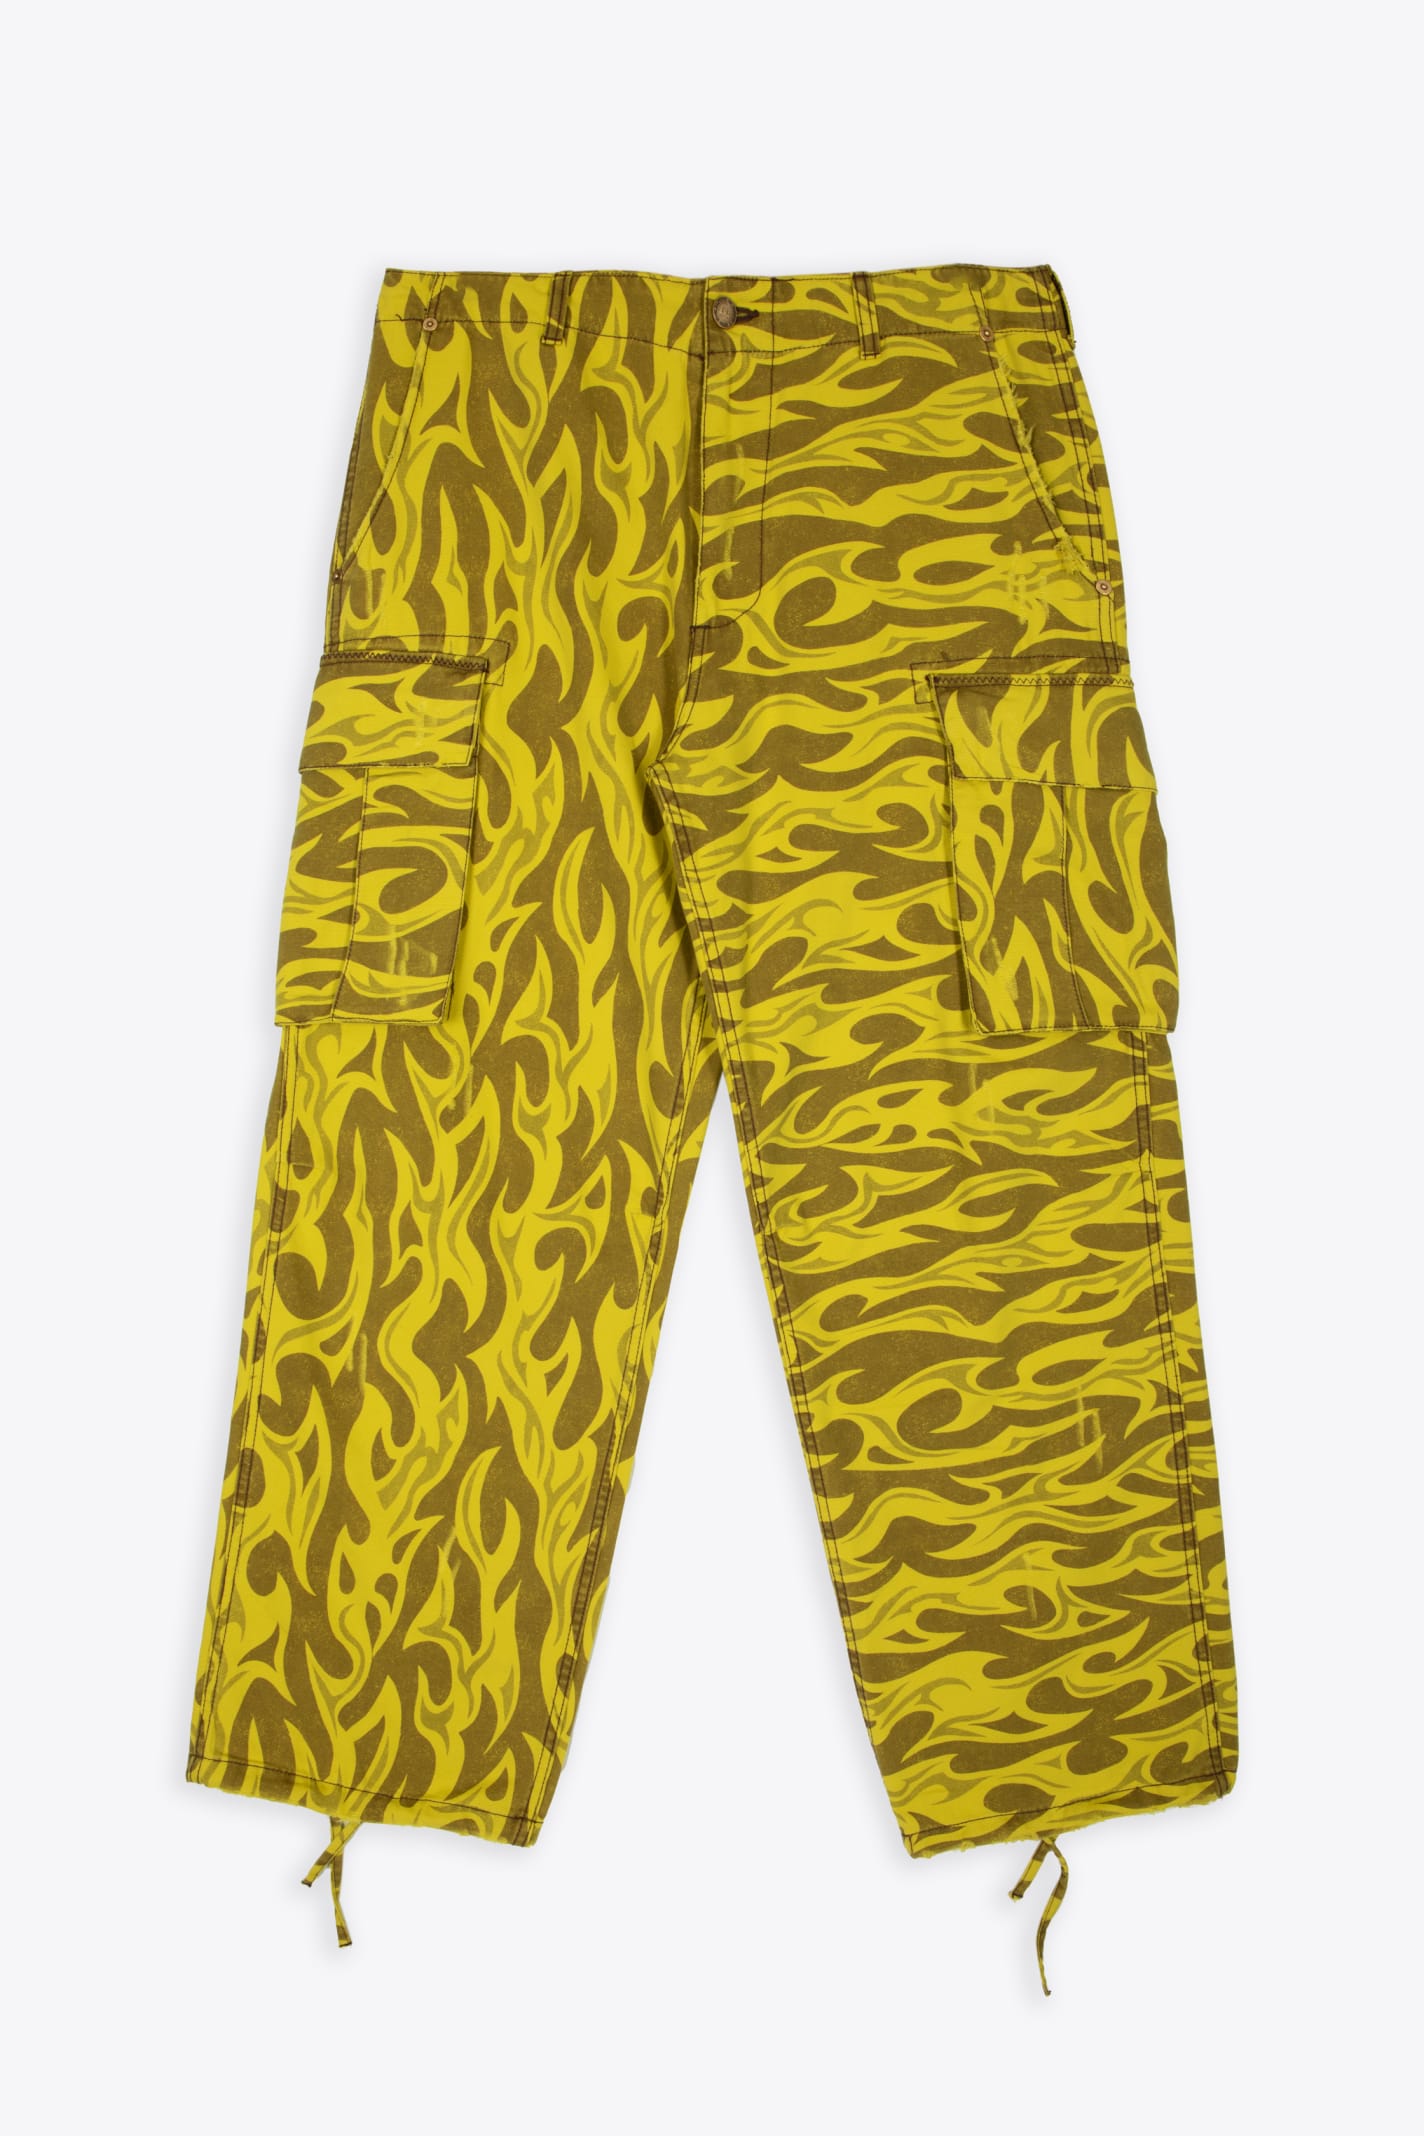 Unisex Printed Cargo Pants Woven Yellow Canvas Printed Cargo Pant - Unisex Printed Cargo Pants Woven